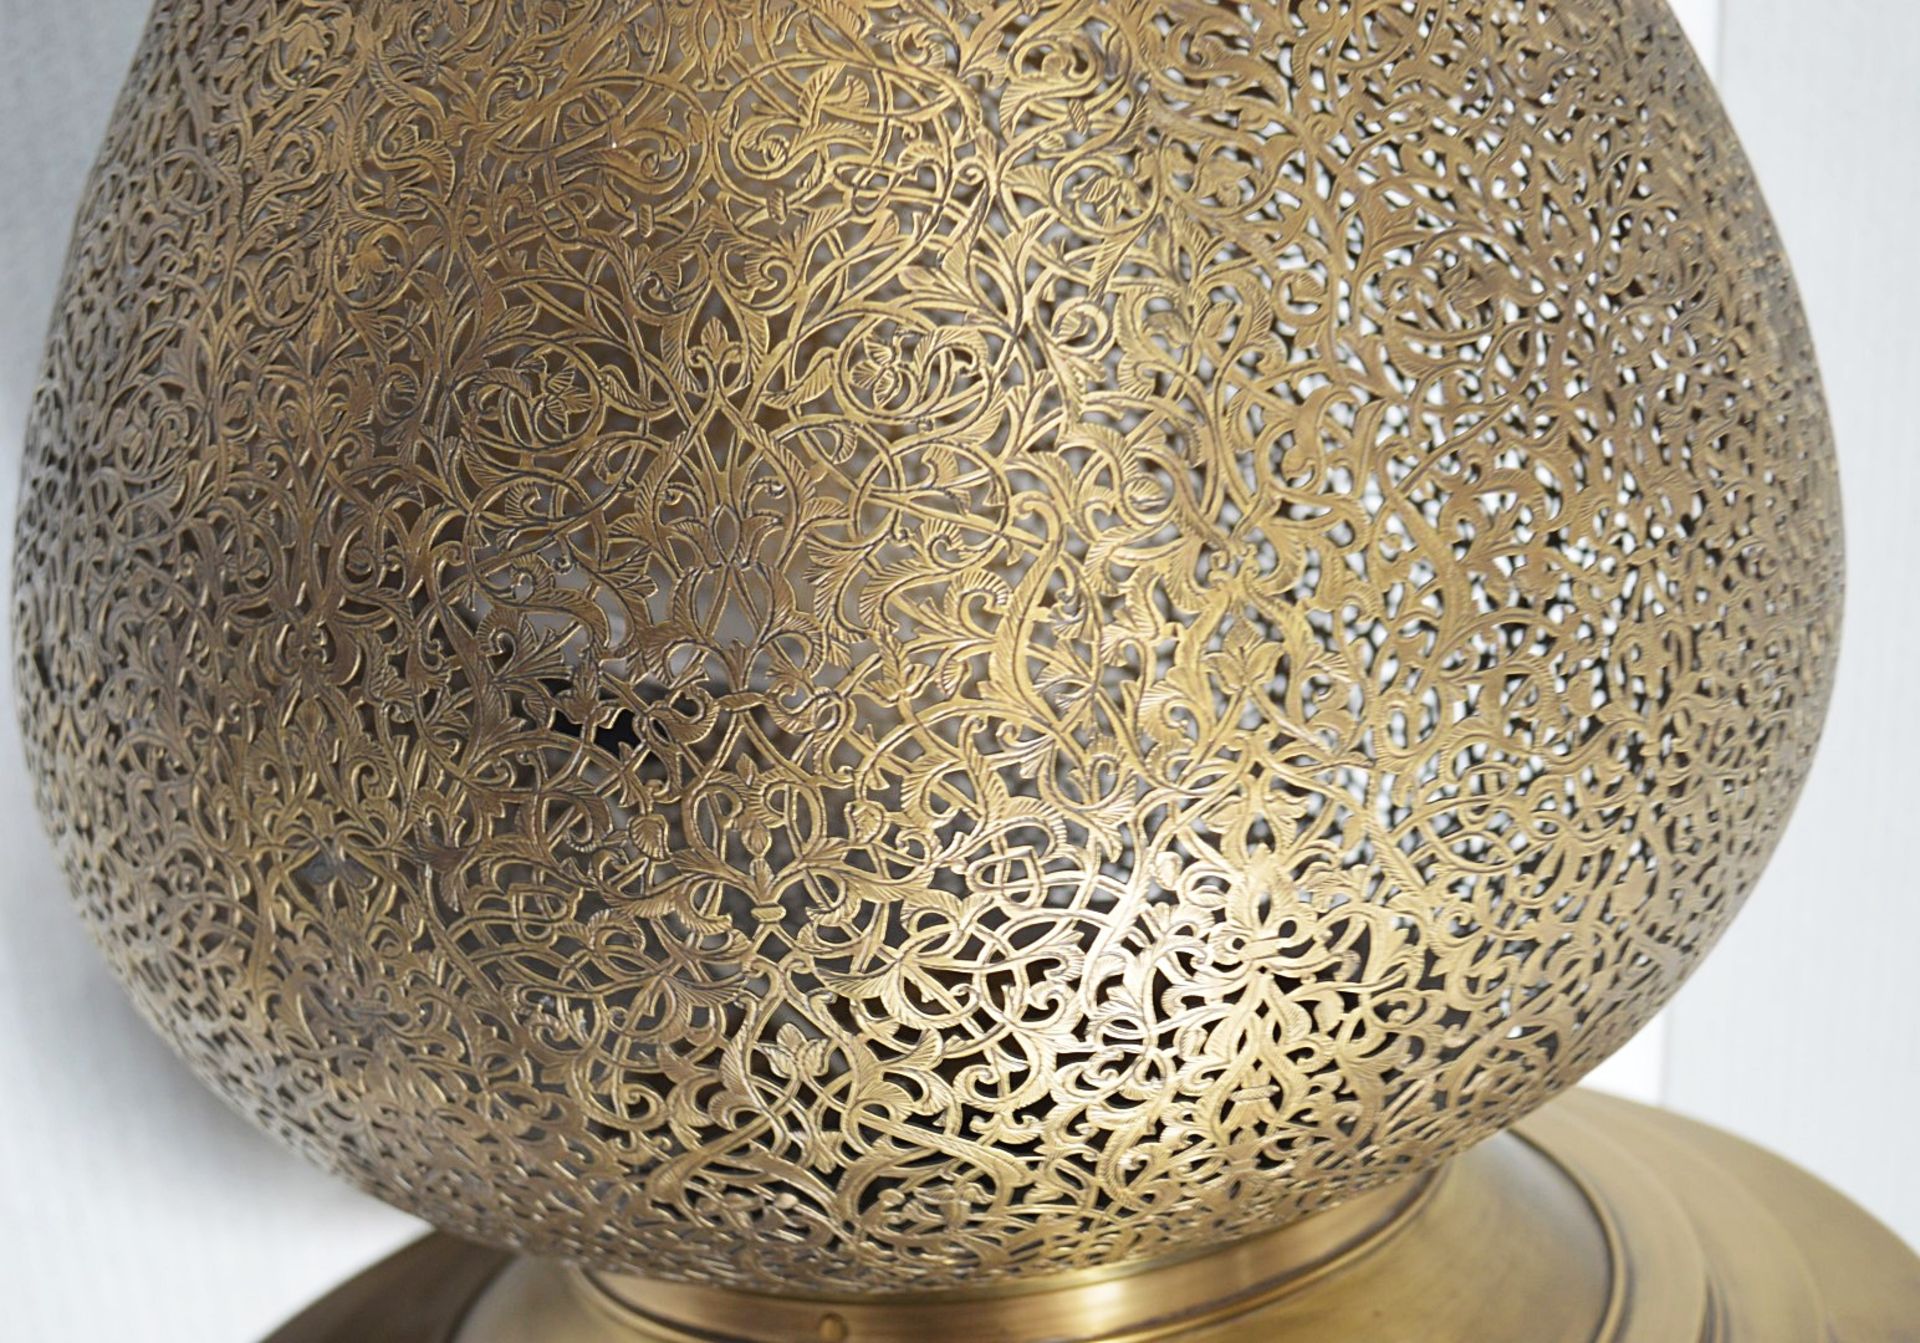 1 x Large 1.3 Metre Moroccan-style Brass Pendant Statement Light Featuring Intricate Filigree - Image 2 of 9